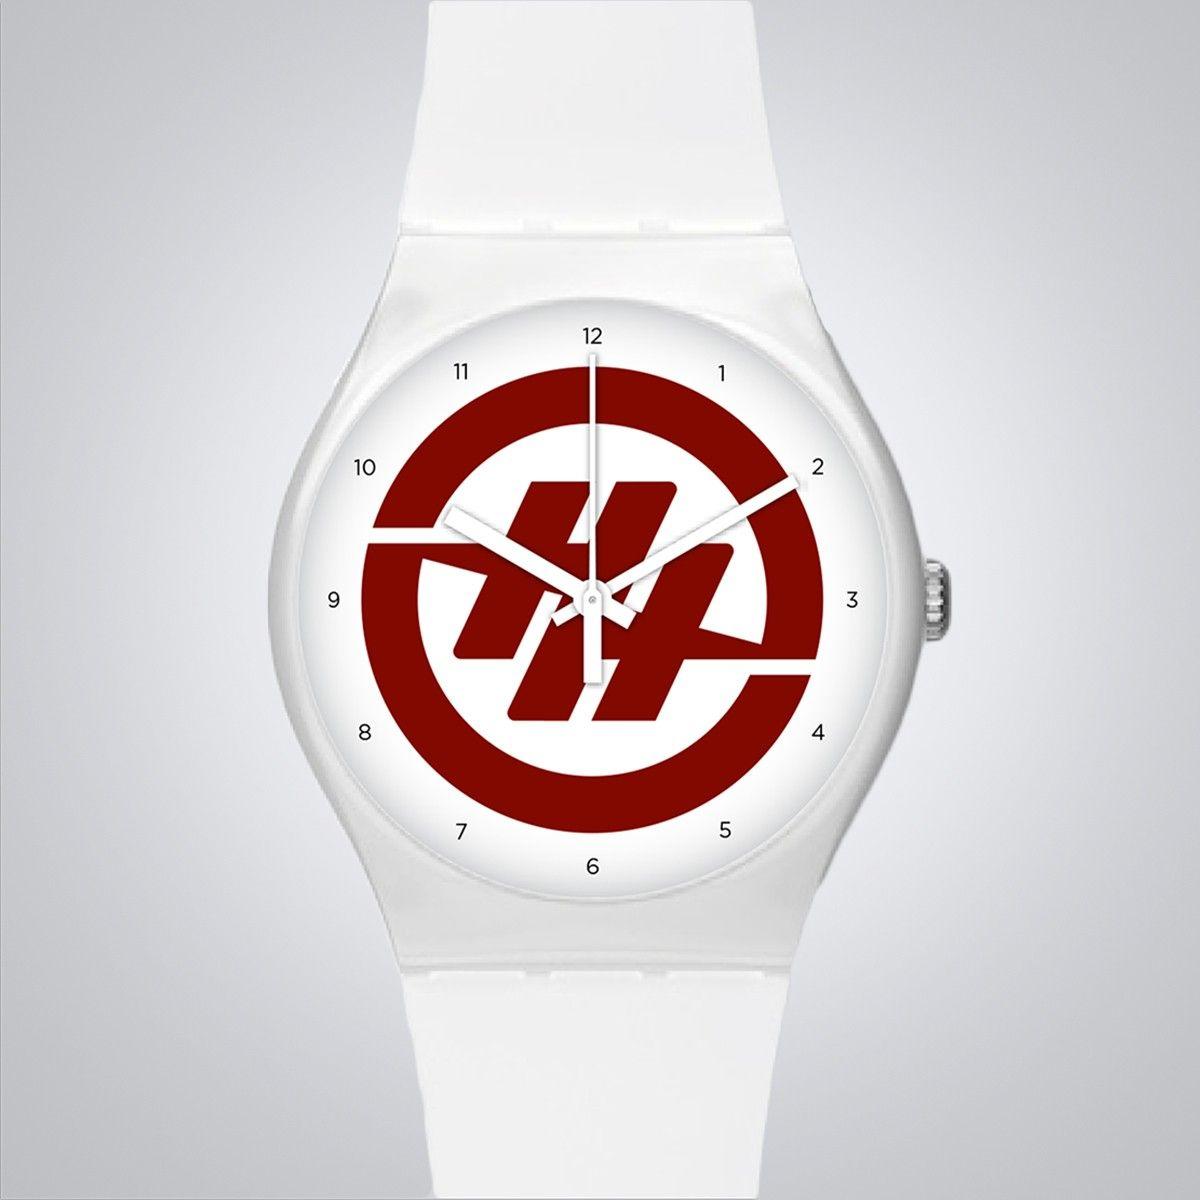 Red HH Logo - HH Logo Watch $15.00. This watch has white rubber straps with